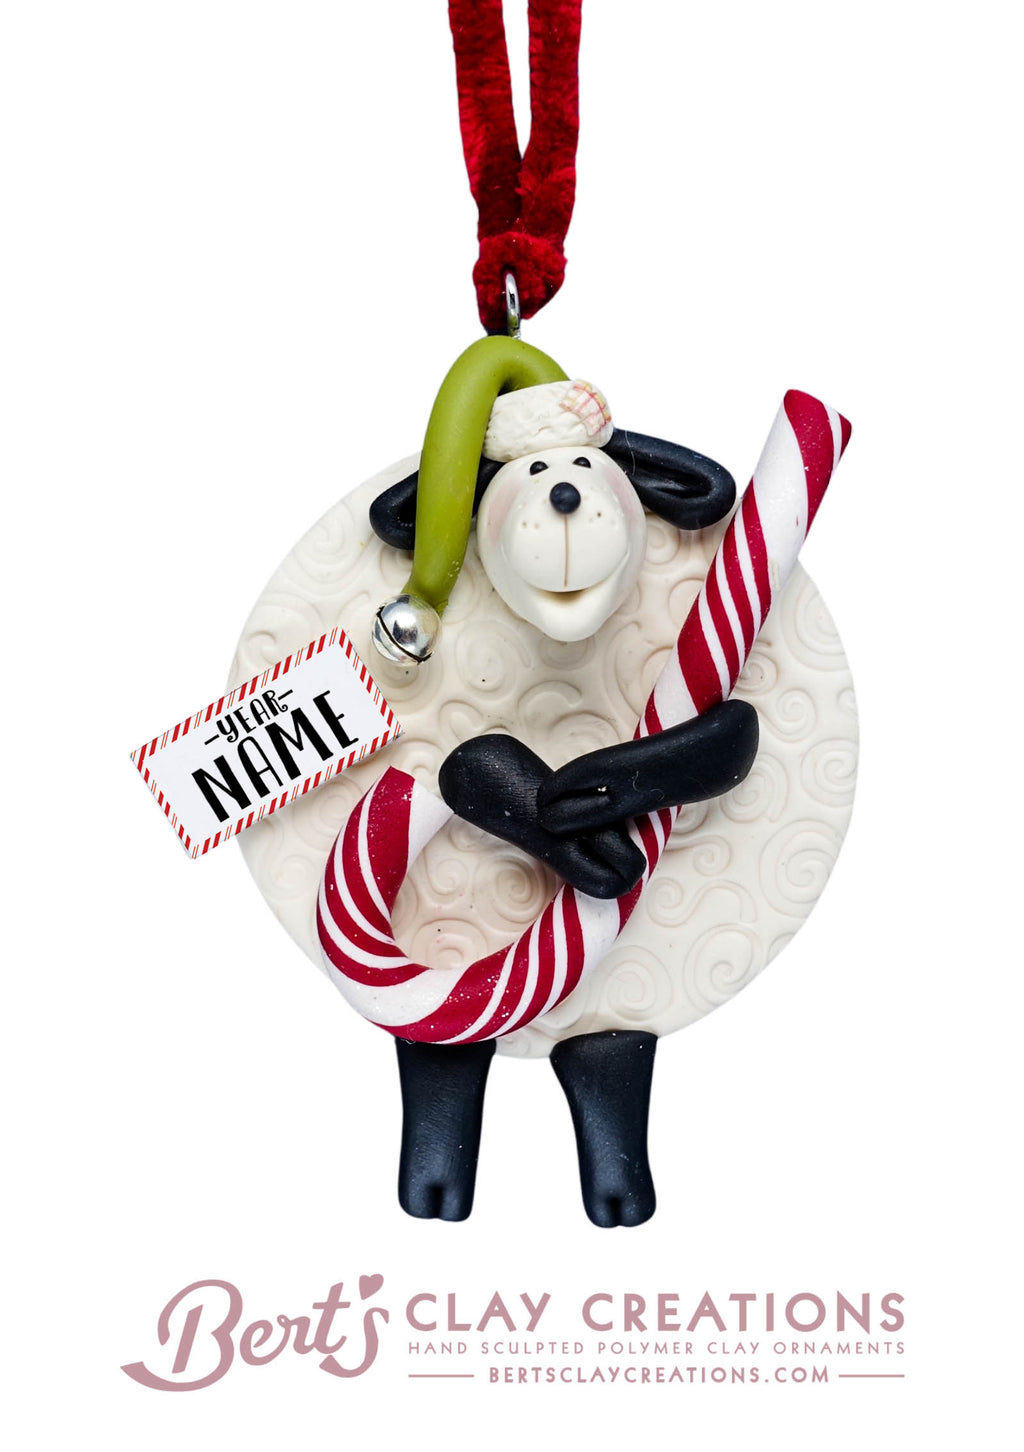 Hallelujah - Candy Cane Sheep Ornament